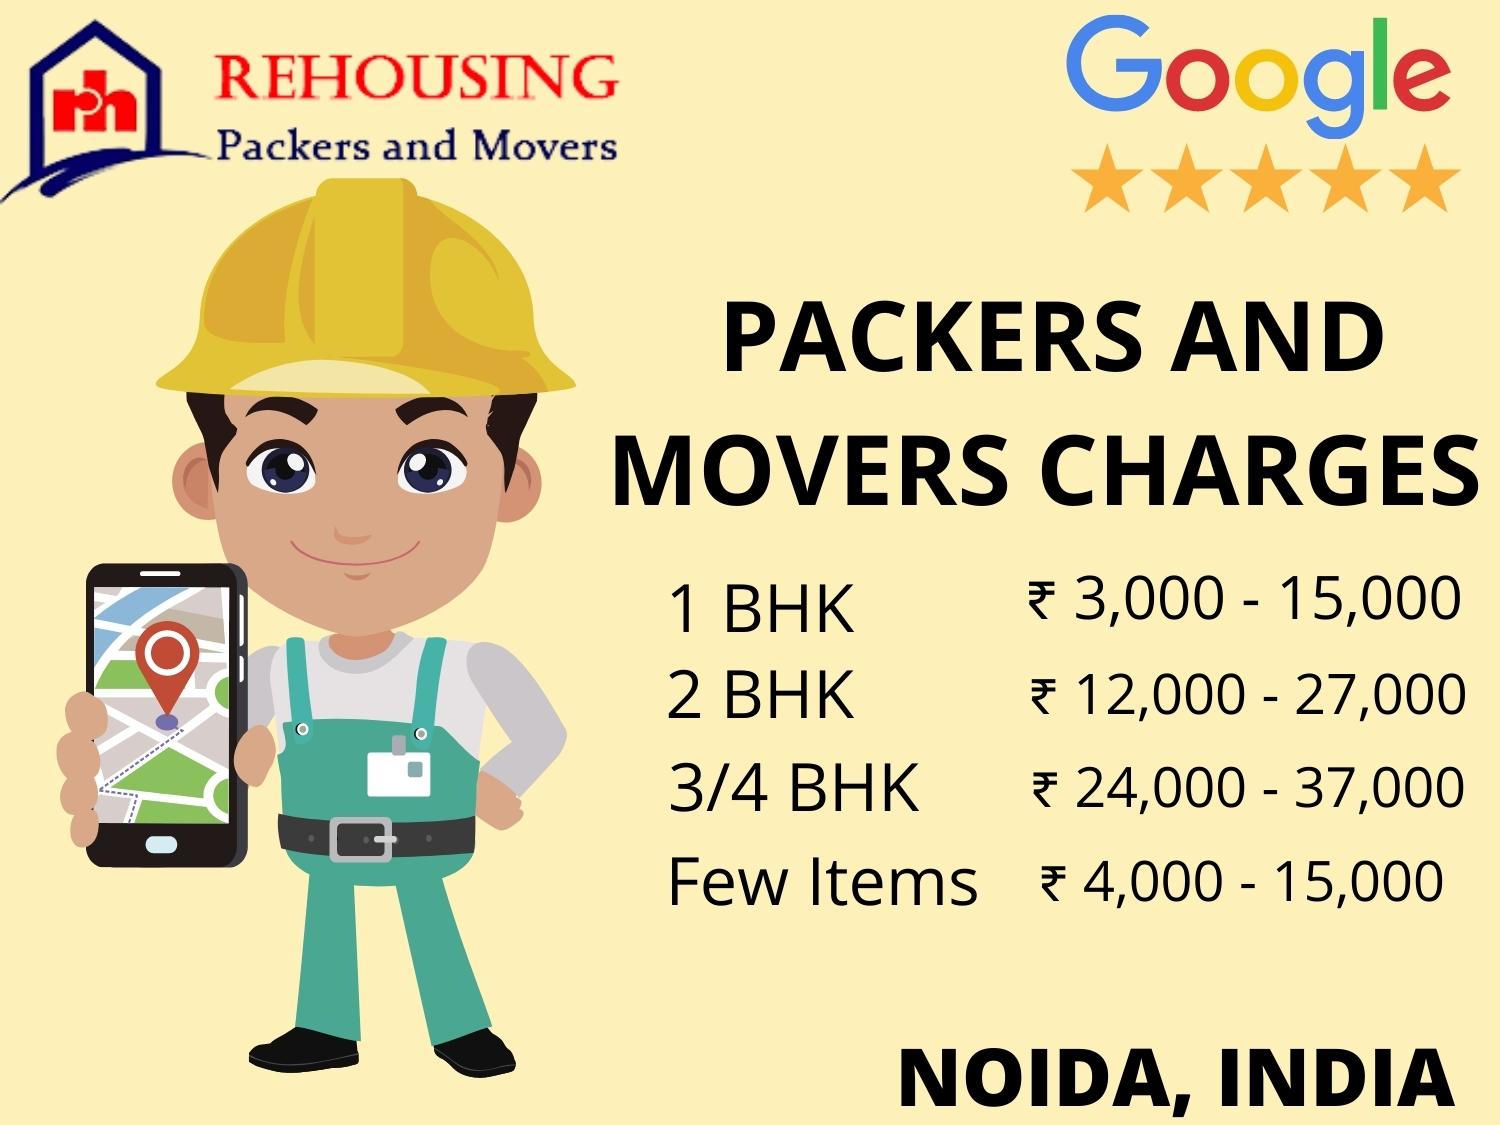 Looking for the best packers and movers in Noida